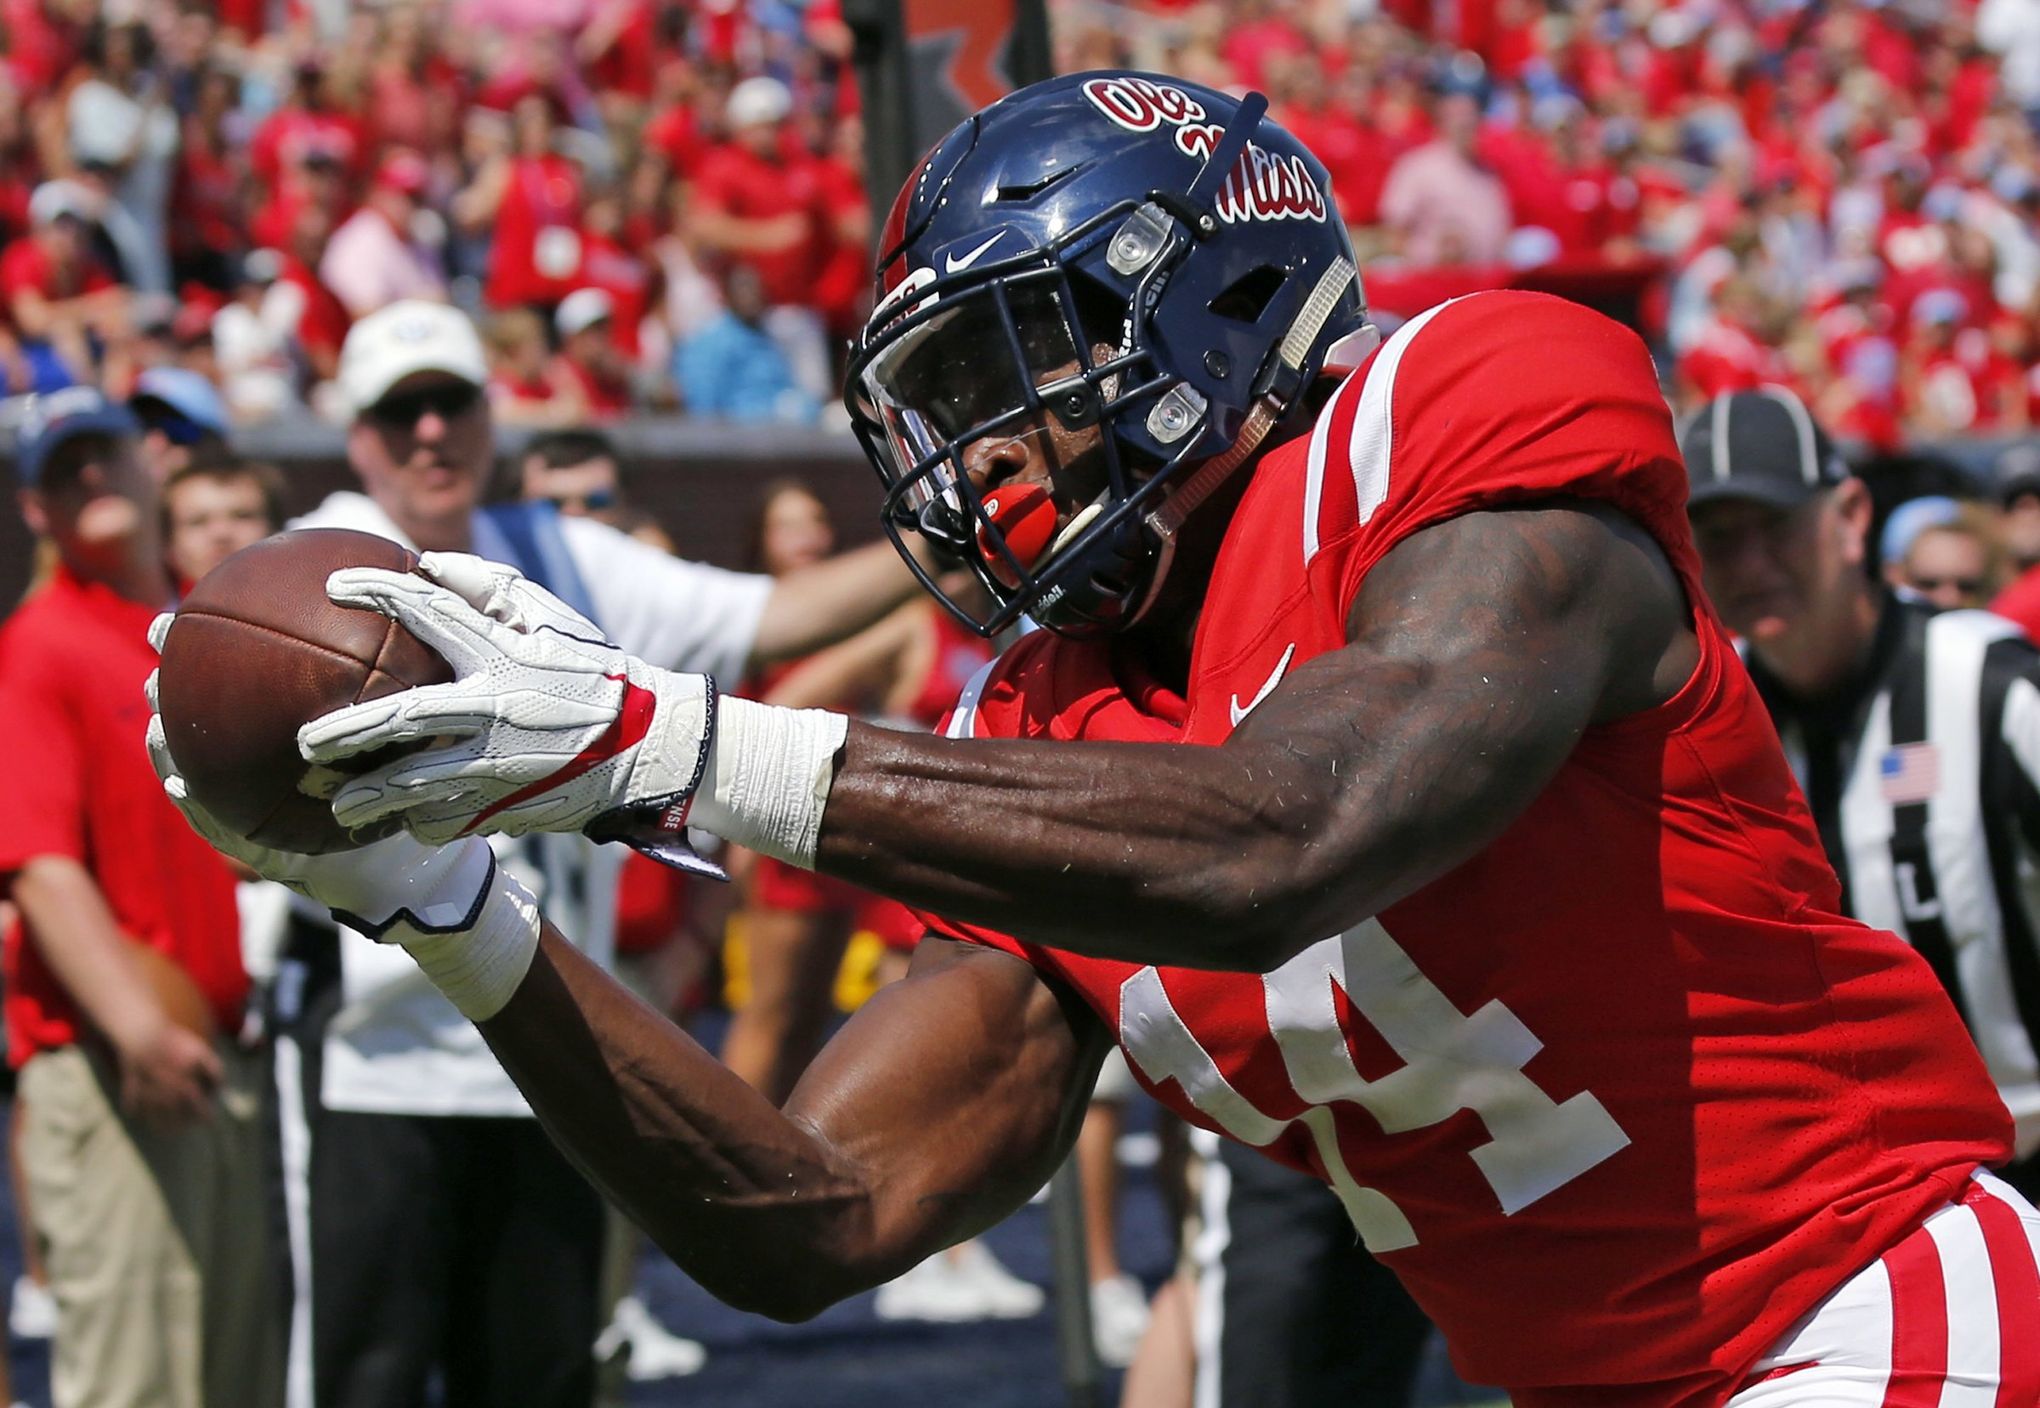 Mississippi's AJ Brown 1 of nation's top college receivers